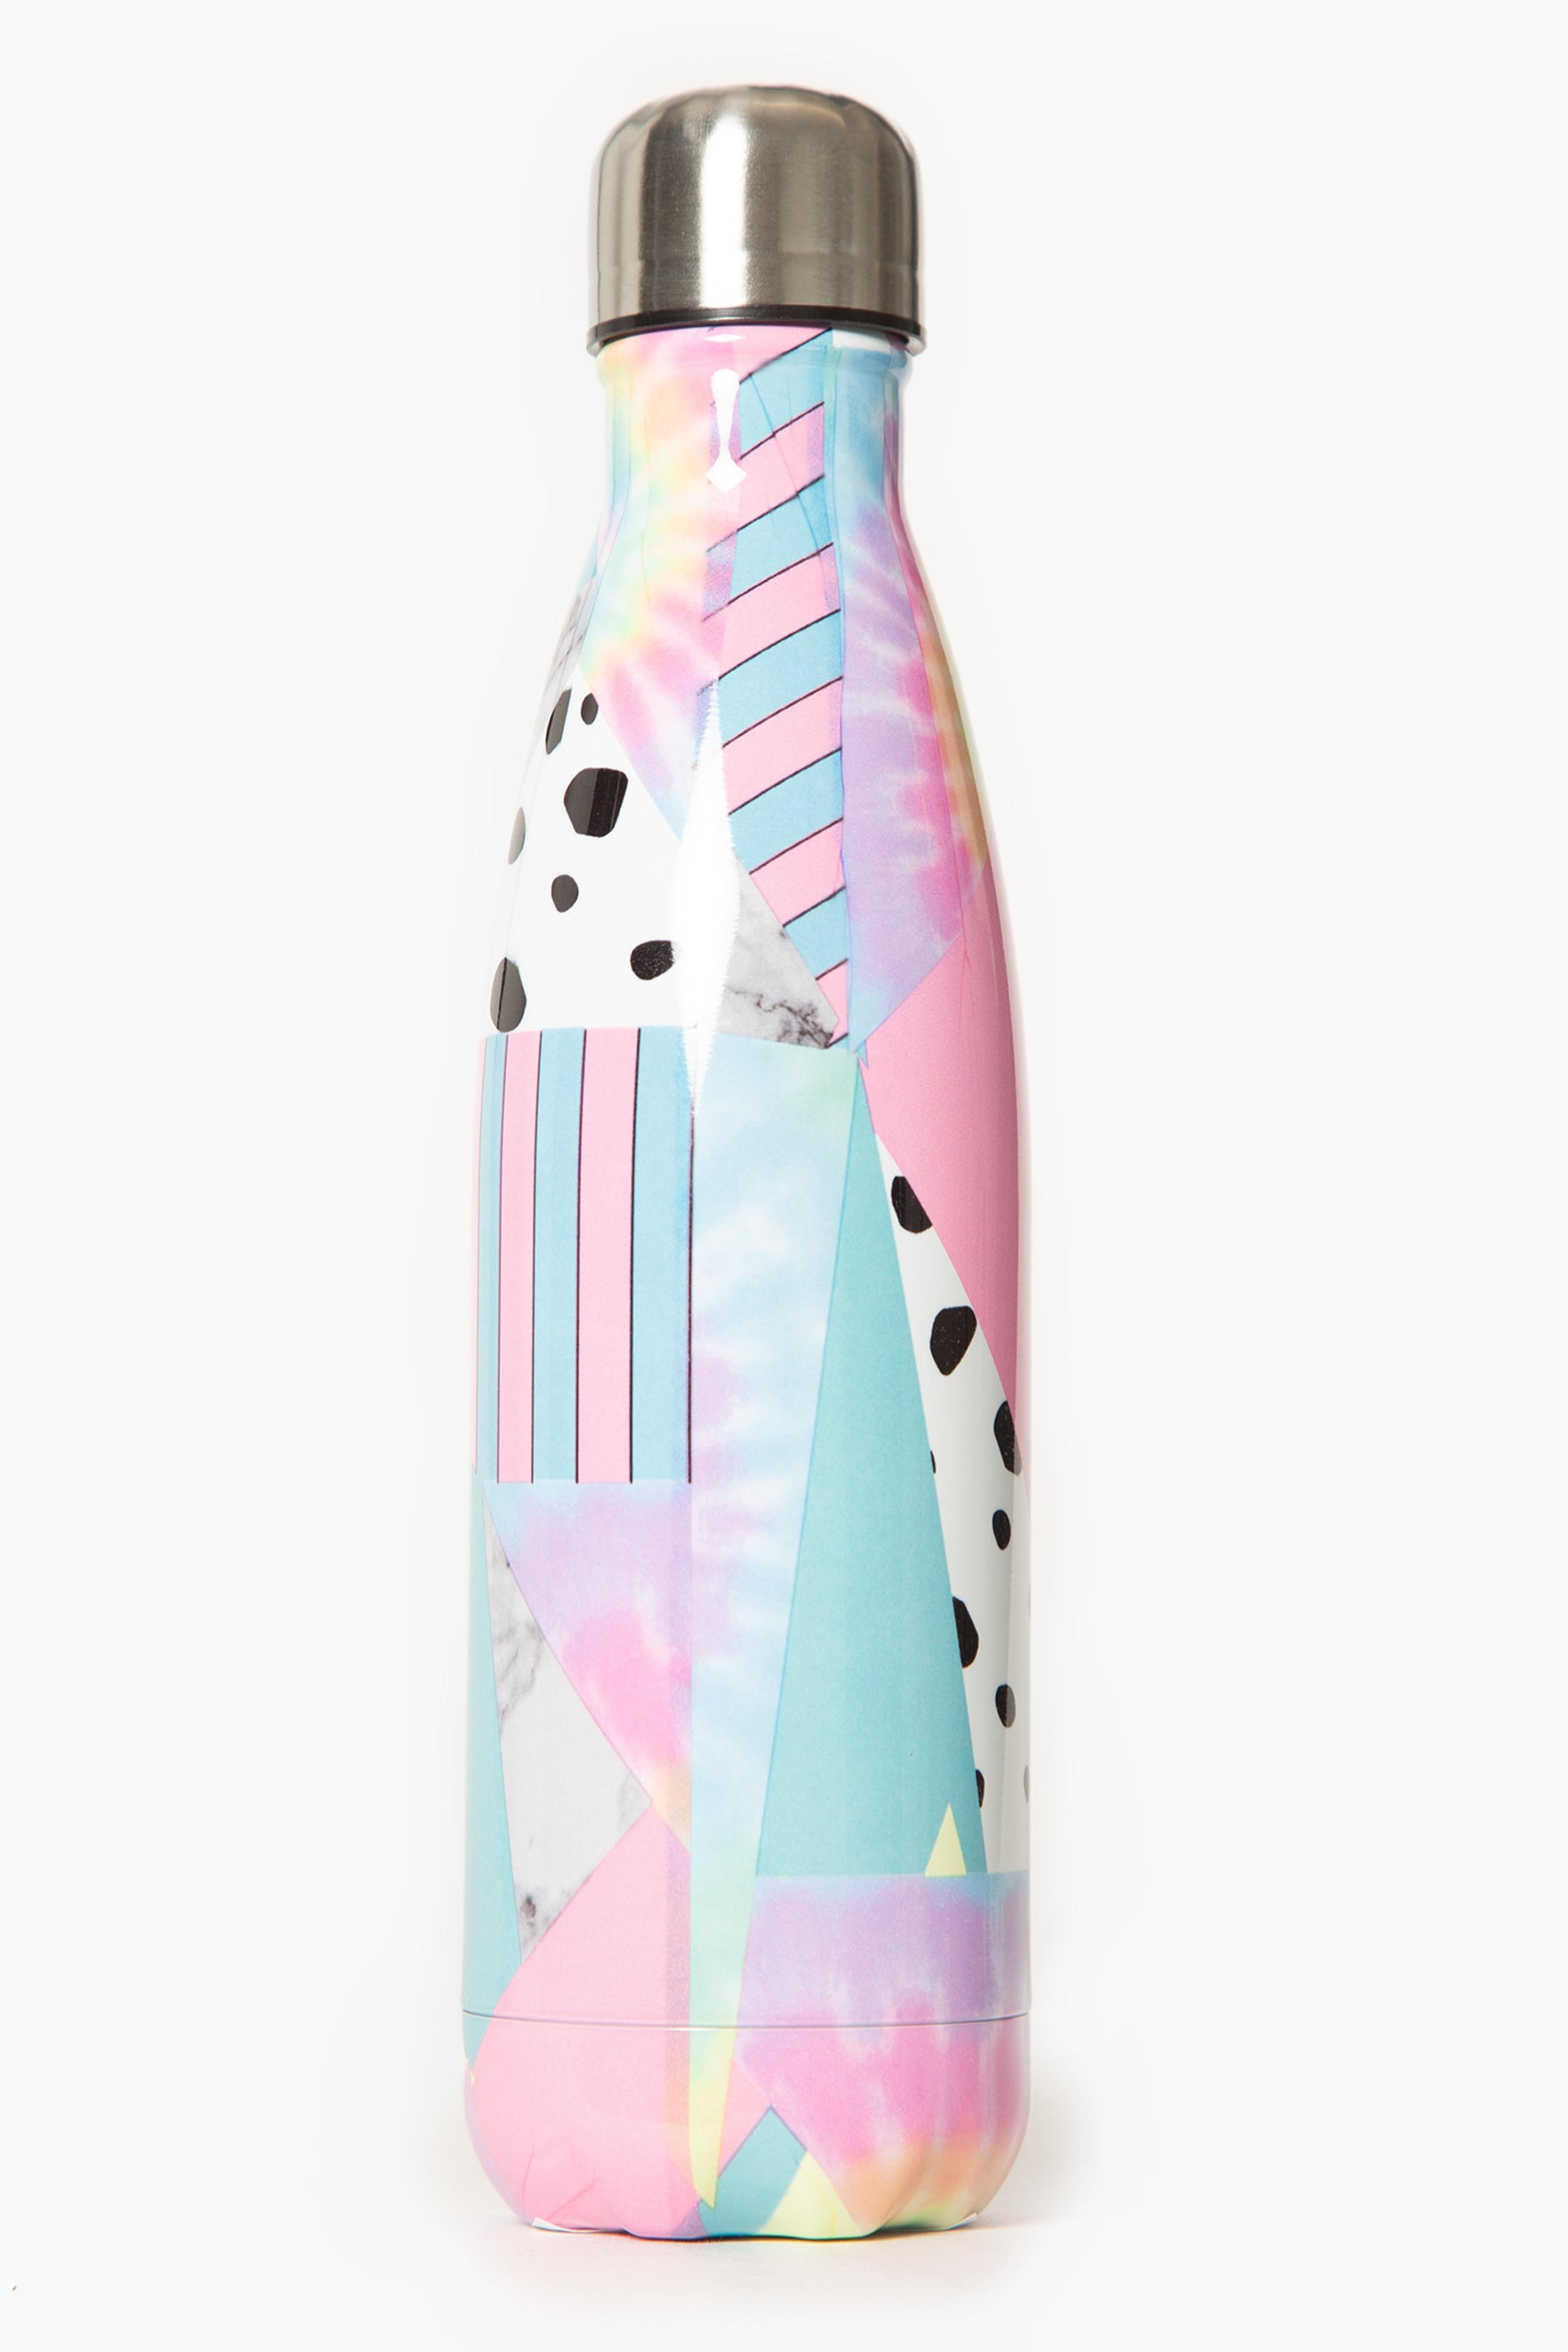 Alternate View 1 of HYPE PASTEL COLLAGE METAL BOTTLE